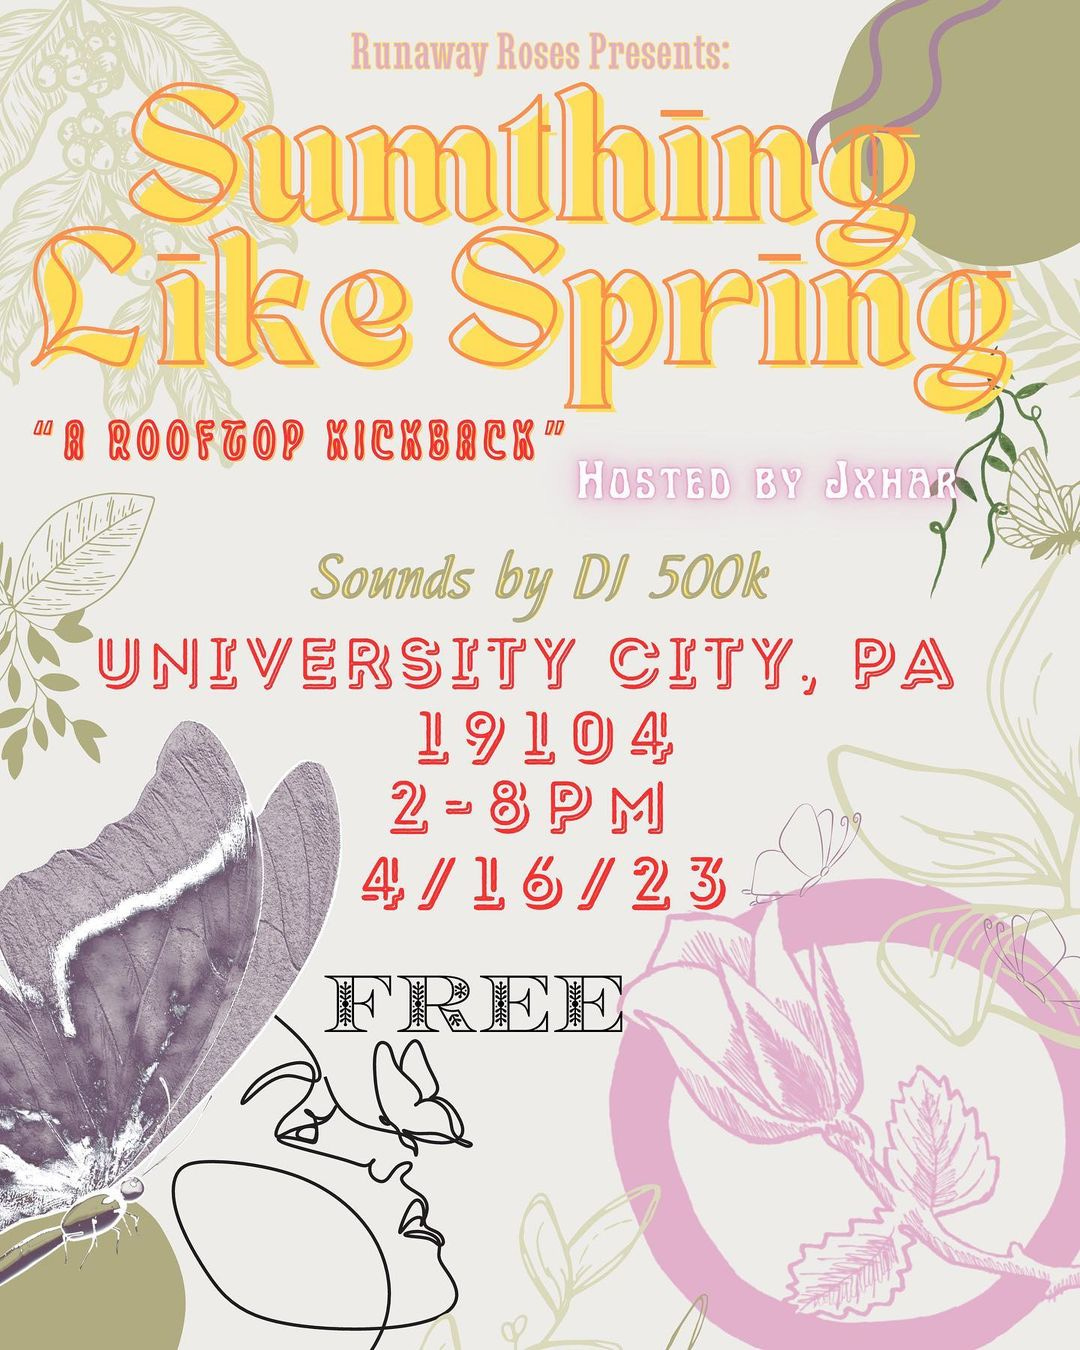 May be an image of text that says 'Runaway Roses Presents: Sumthing Like Spring 00 8ိ ROOFTOP KICKBACK' HOSTED BY JXHAR Sounds by DJ 500k UNIVERSITY CITY PA 19104 2-8PM 4/16/23 FREE'